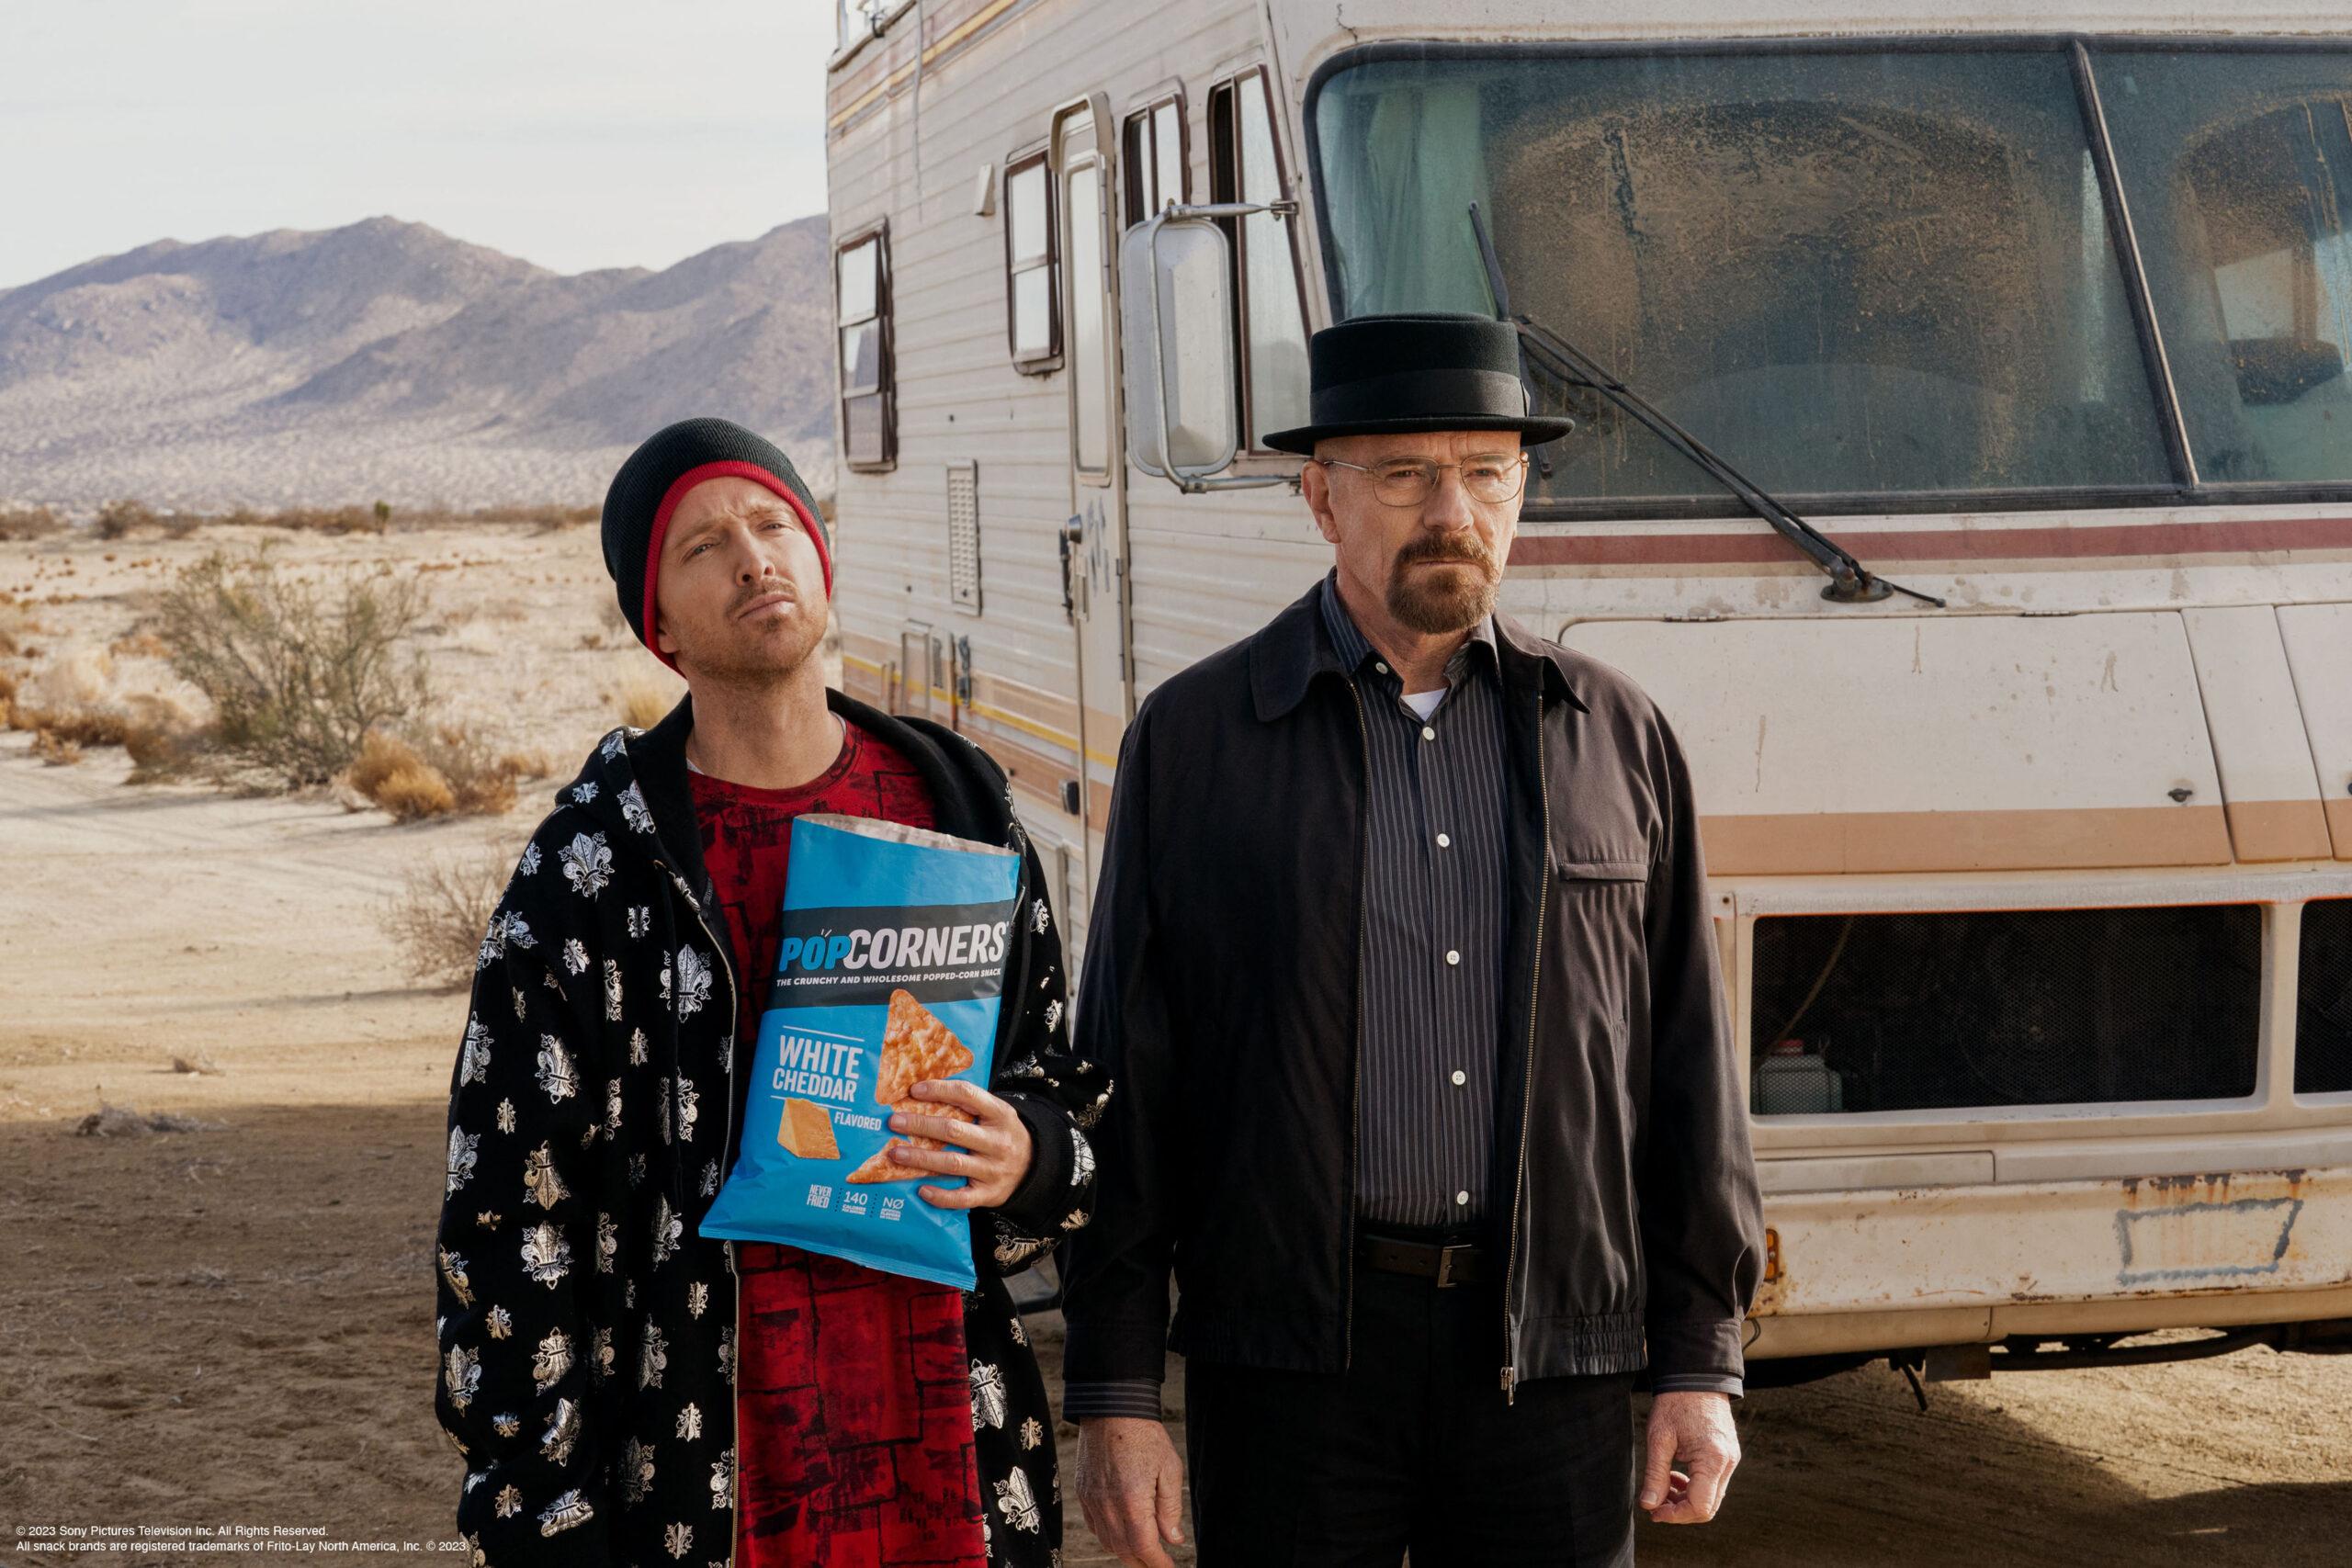 Breaking Bad s Walter White and Jesse Pinkman are back as Bryan Cranston and Aaron Paul star in PopCorners Super Bowl commercial